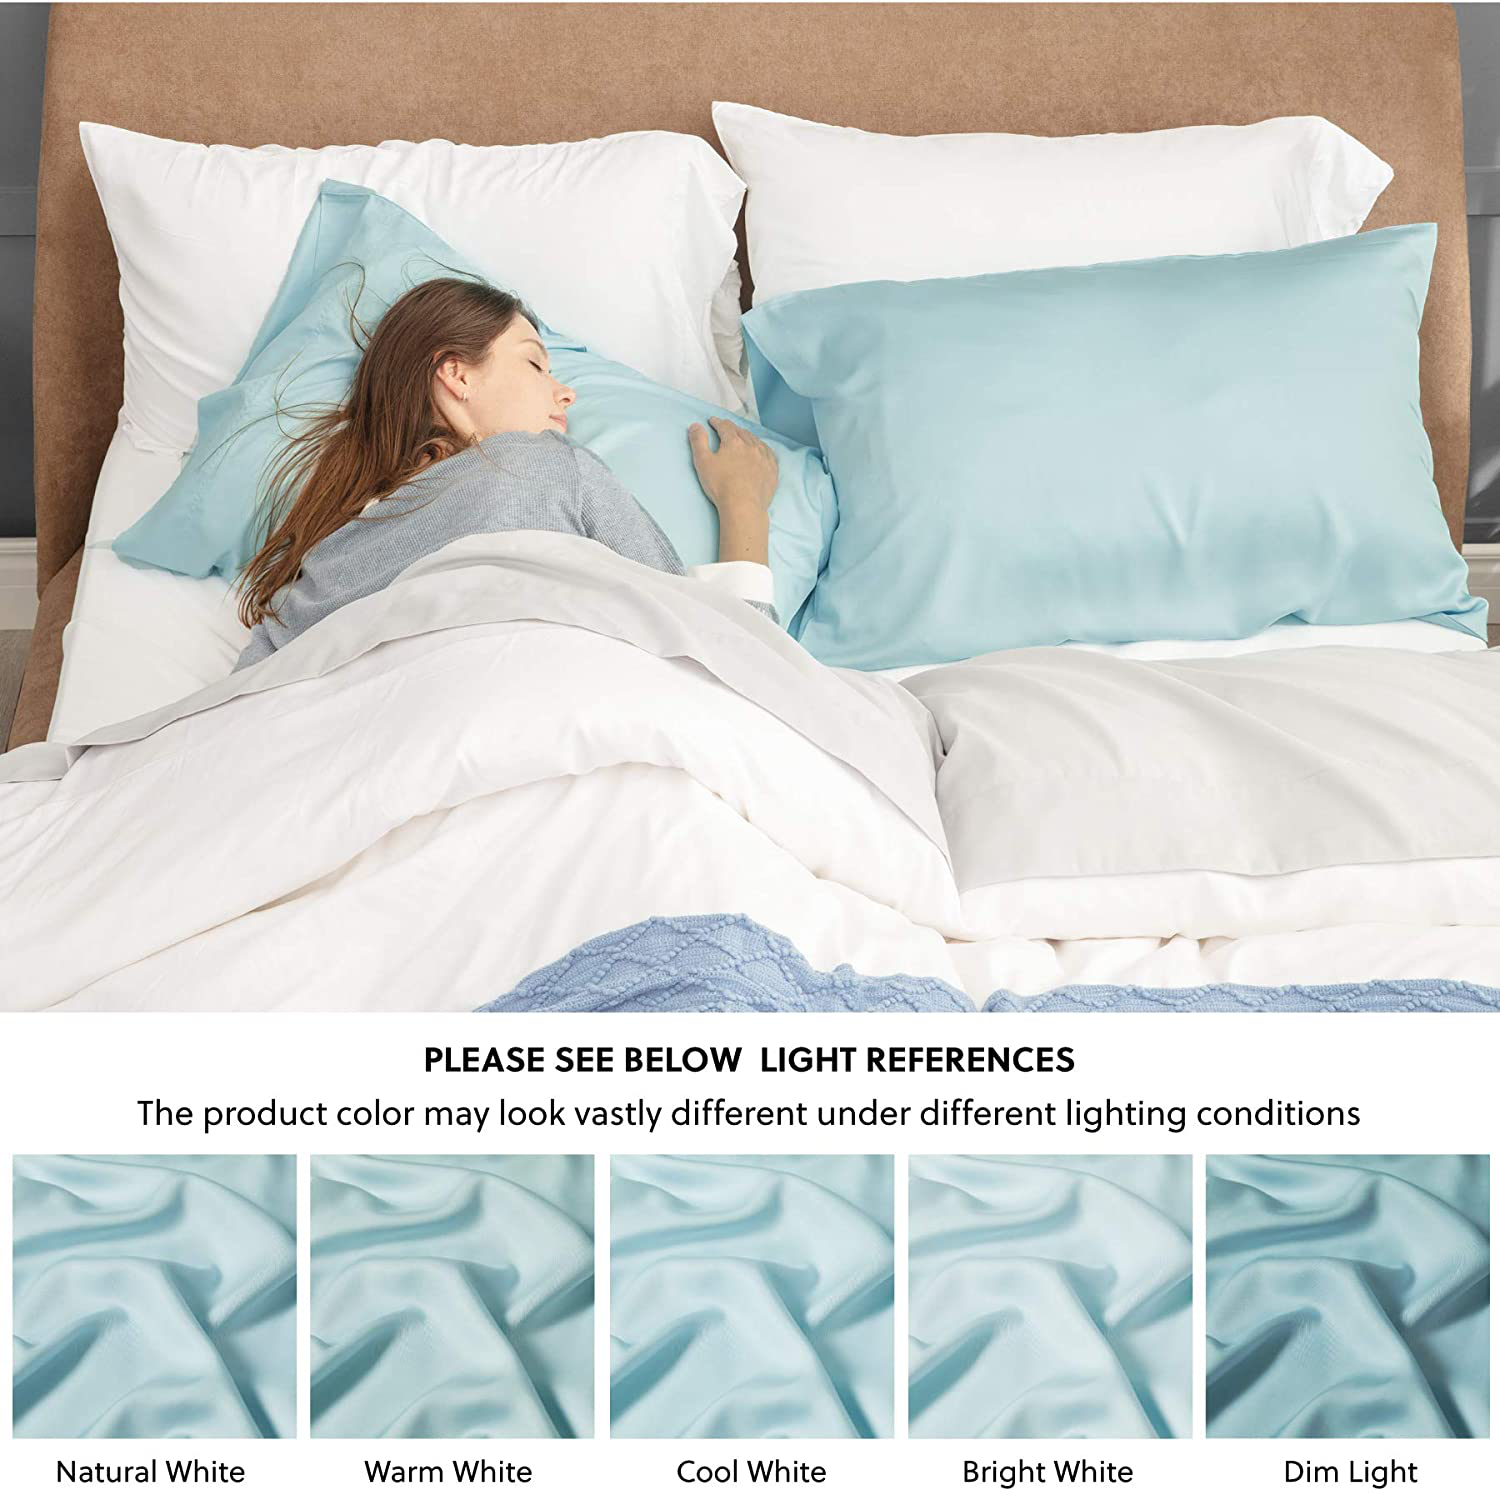 Bedsure Bamboo Pillow Cases for Kids Standard Size Set of 2 - Teal Cooling Pillowcases 2 Pack with Envelope Closure, Cool and Breathable Pillow Case, 20x26 inches